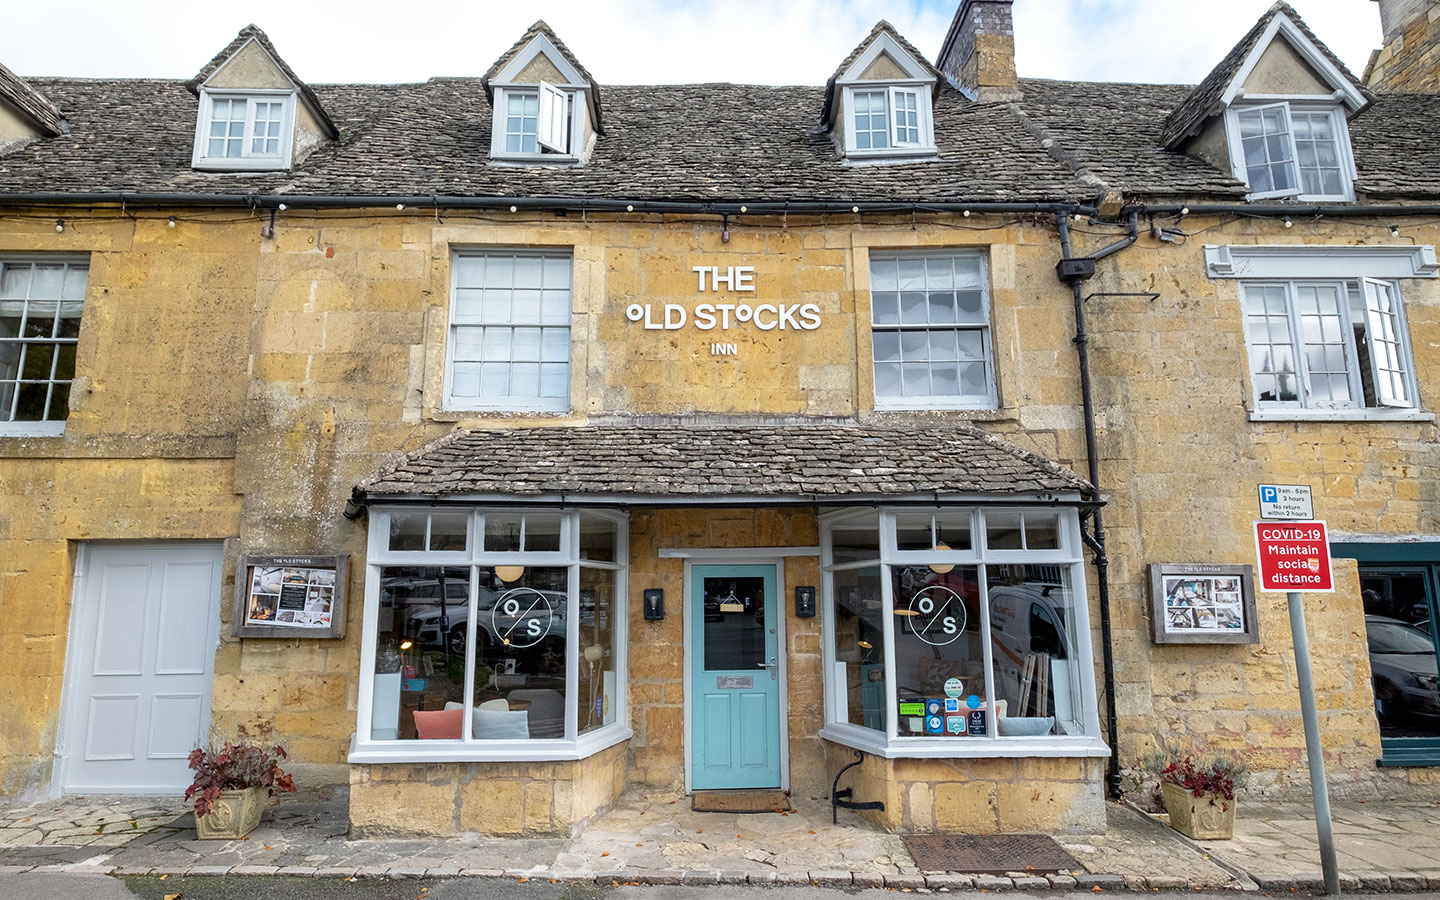 The Old Stocks Inn in Stow-on0the-Wold